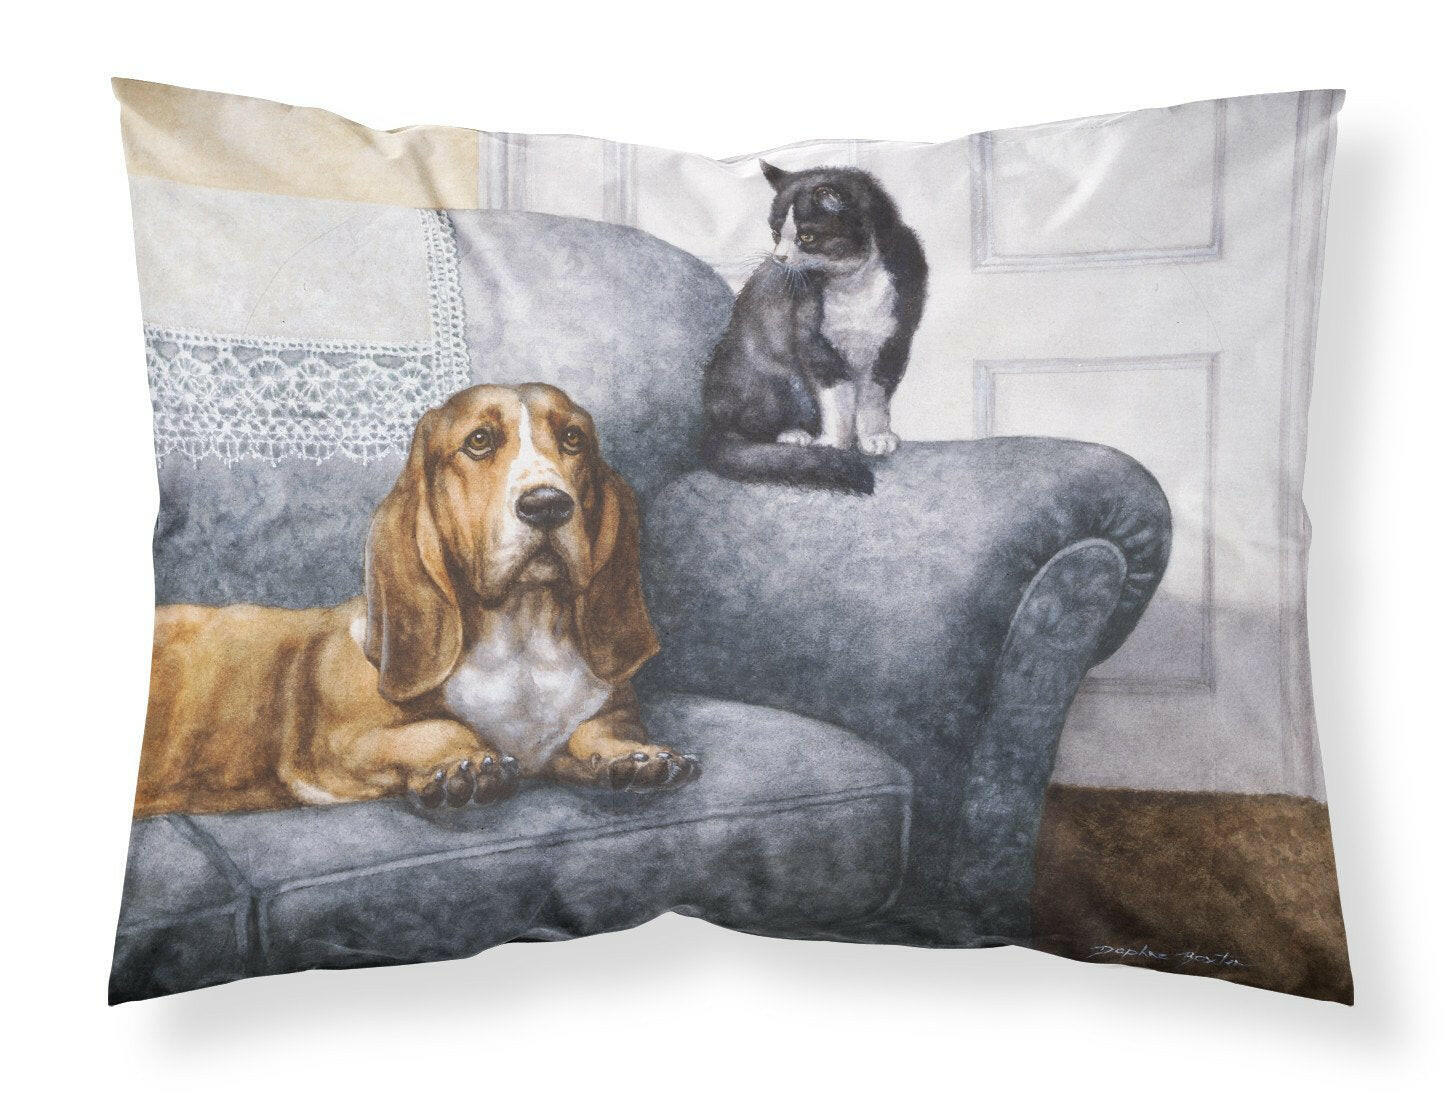 Basset Hound and Cat on couch Fabric Standard Pillowcase BDBA0182PILLOWCASE by Caroline's Treasures